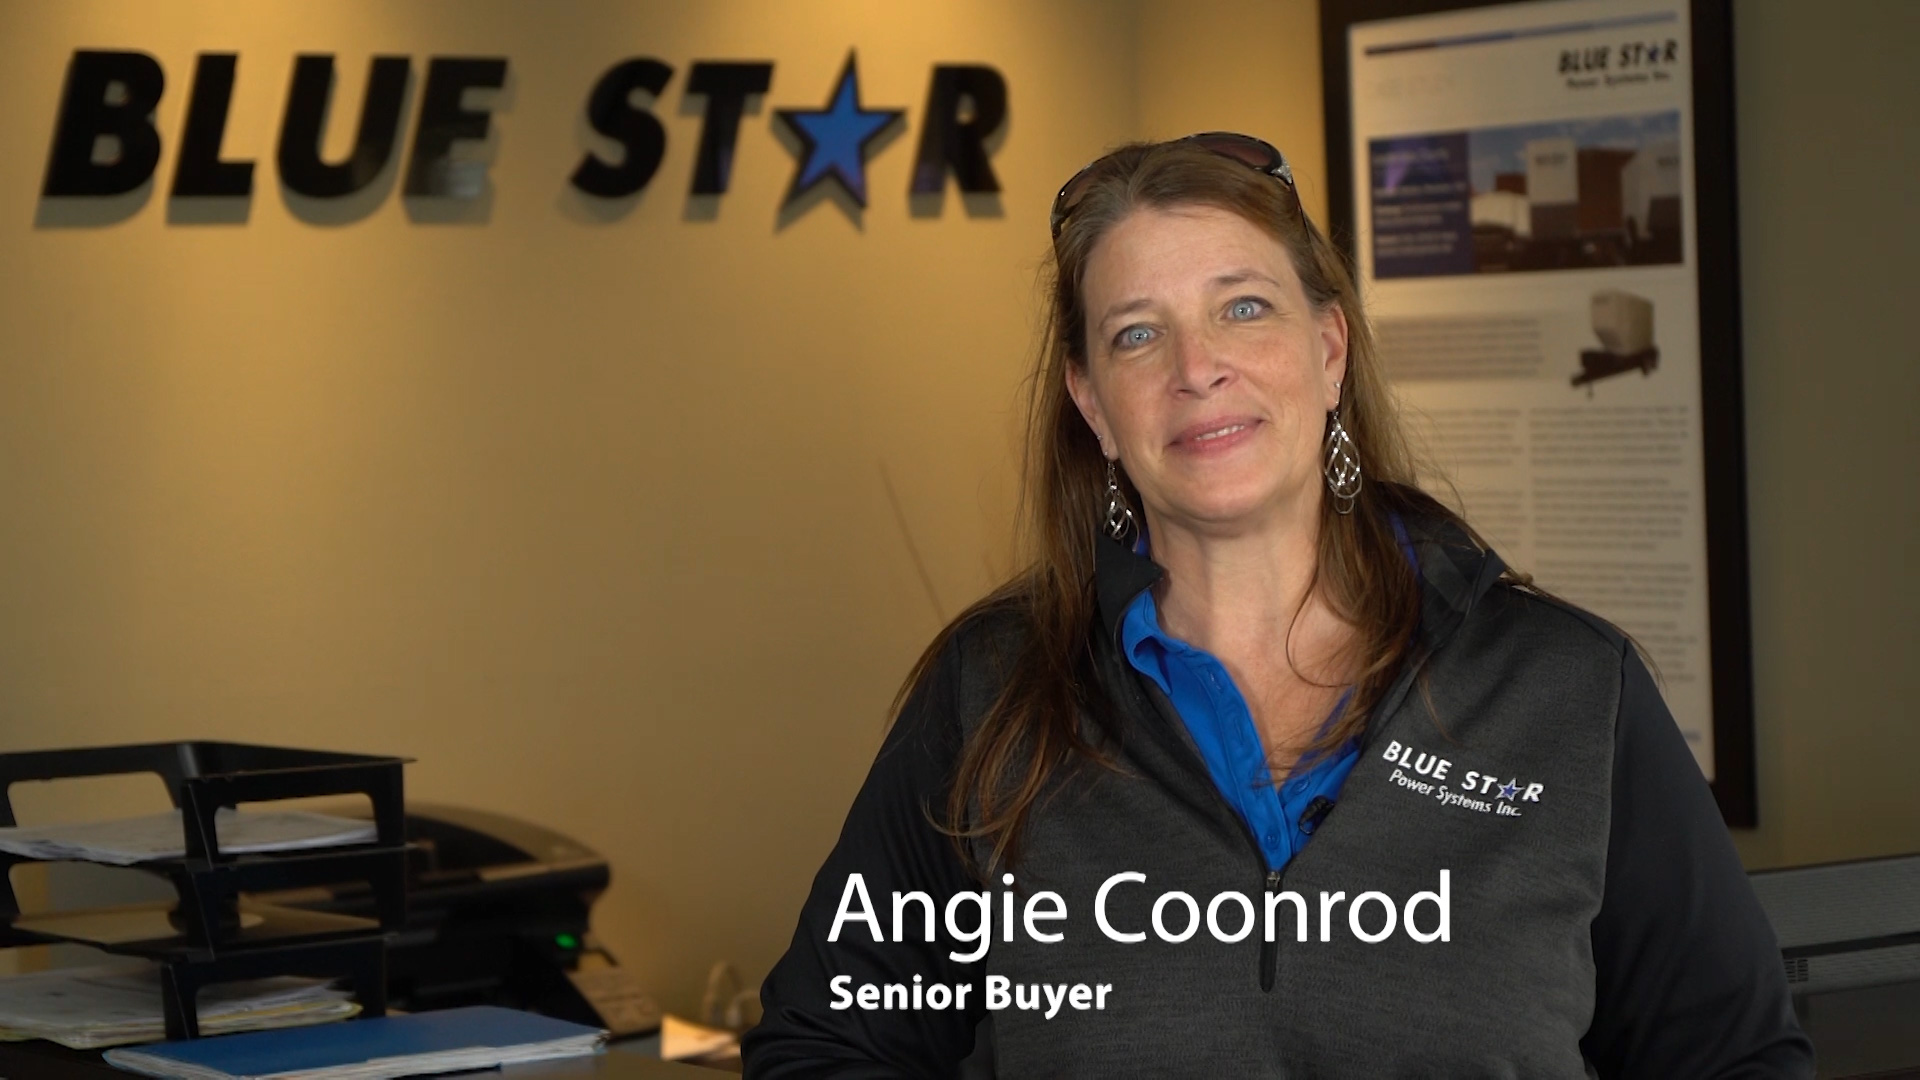 Angie Coonrod, Senior Buyer, Blue Star Power Systems